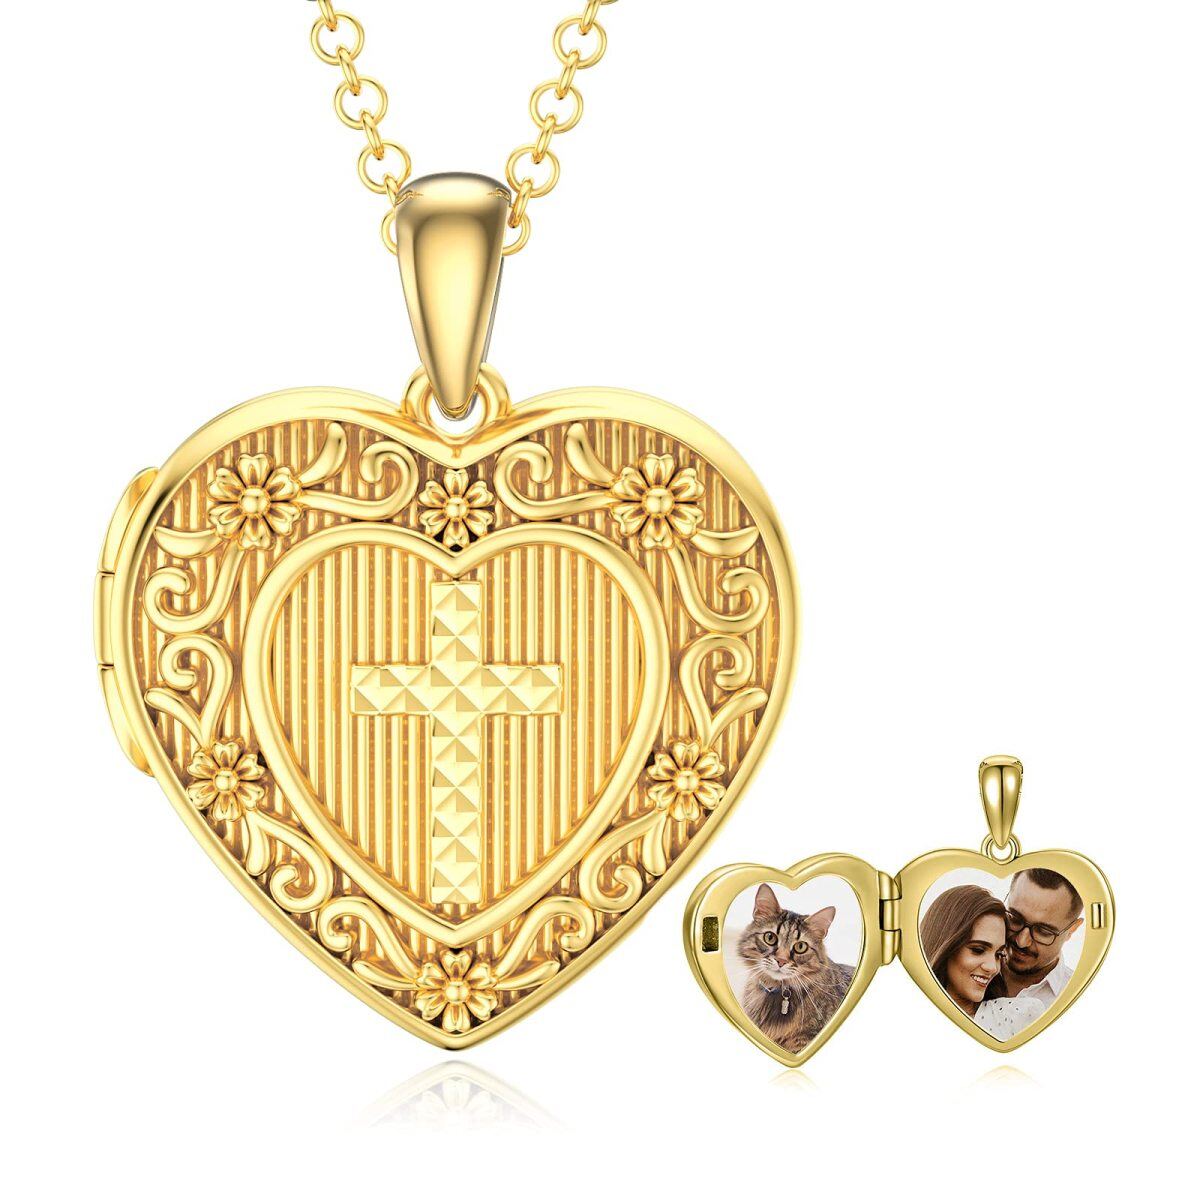 Sterling Silver with Yellow Gold Plated Cross Heart Personalized Engraving Photo Locket Necklace-1